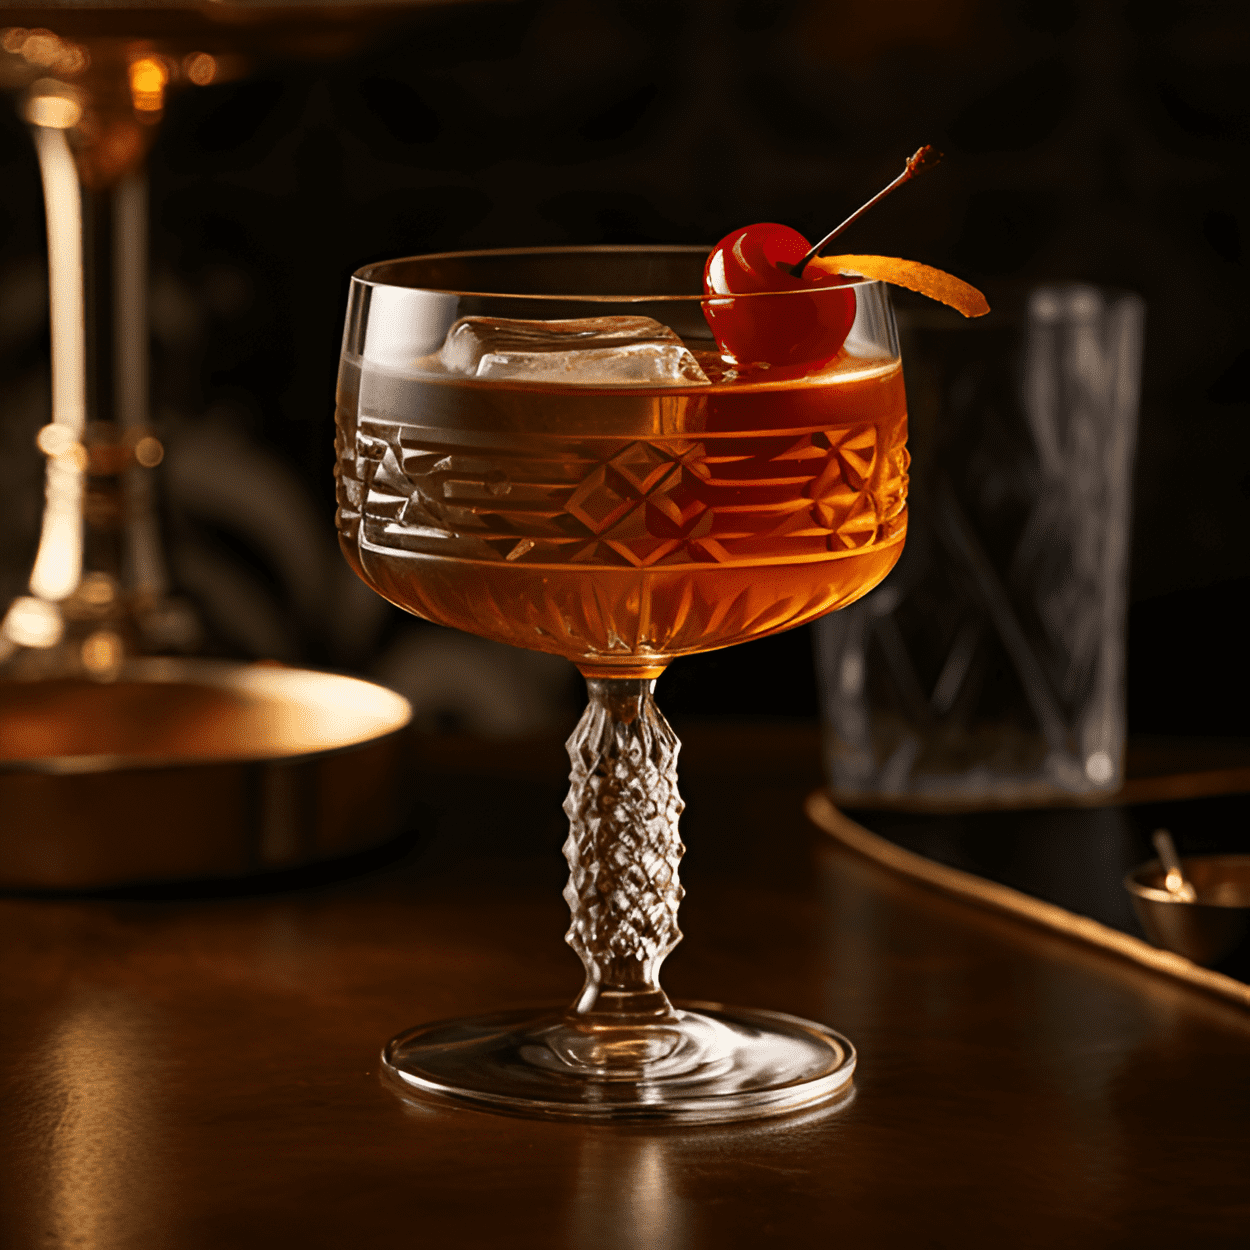 STP Cocktail Recipe - The STP cocktail is a strong, robust drink with a hint of sweetness. It has a rich, full-bodied flavor with a smooth finish.